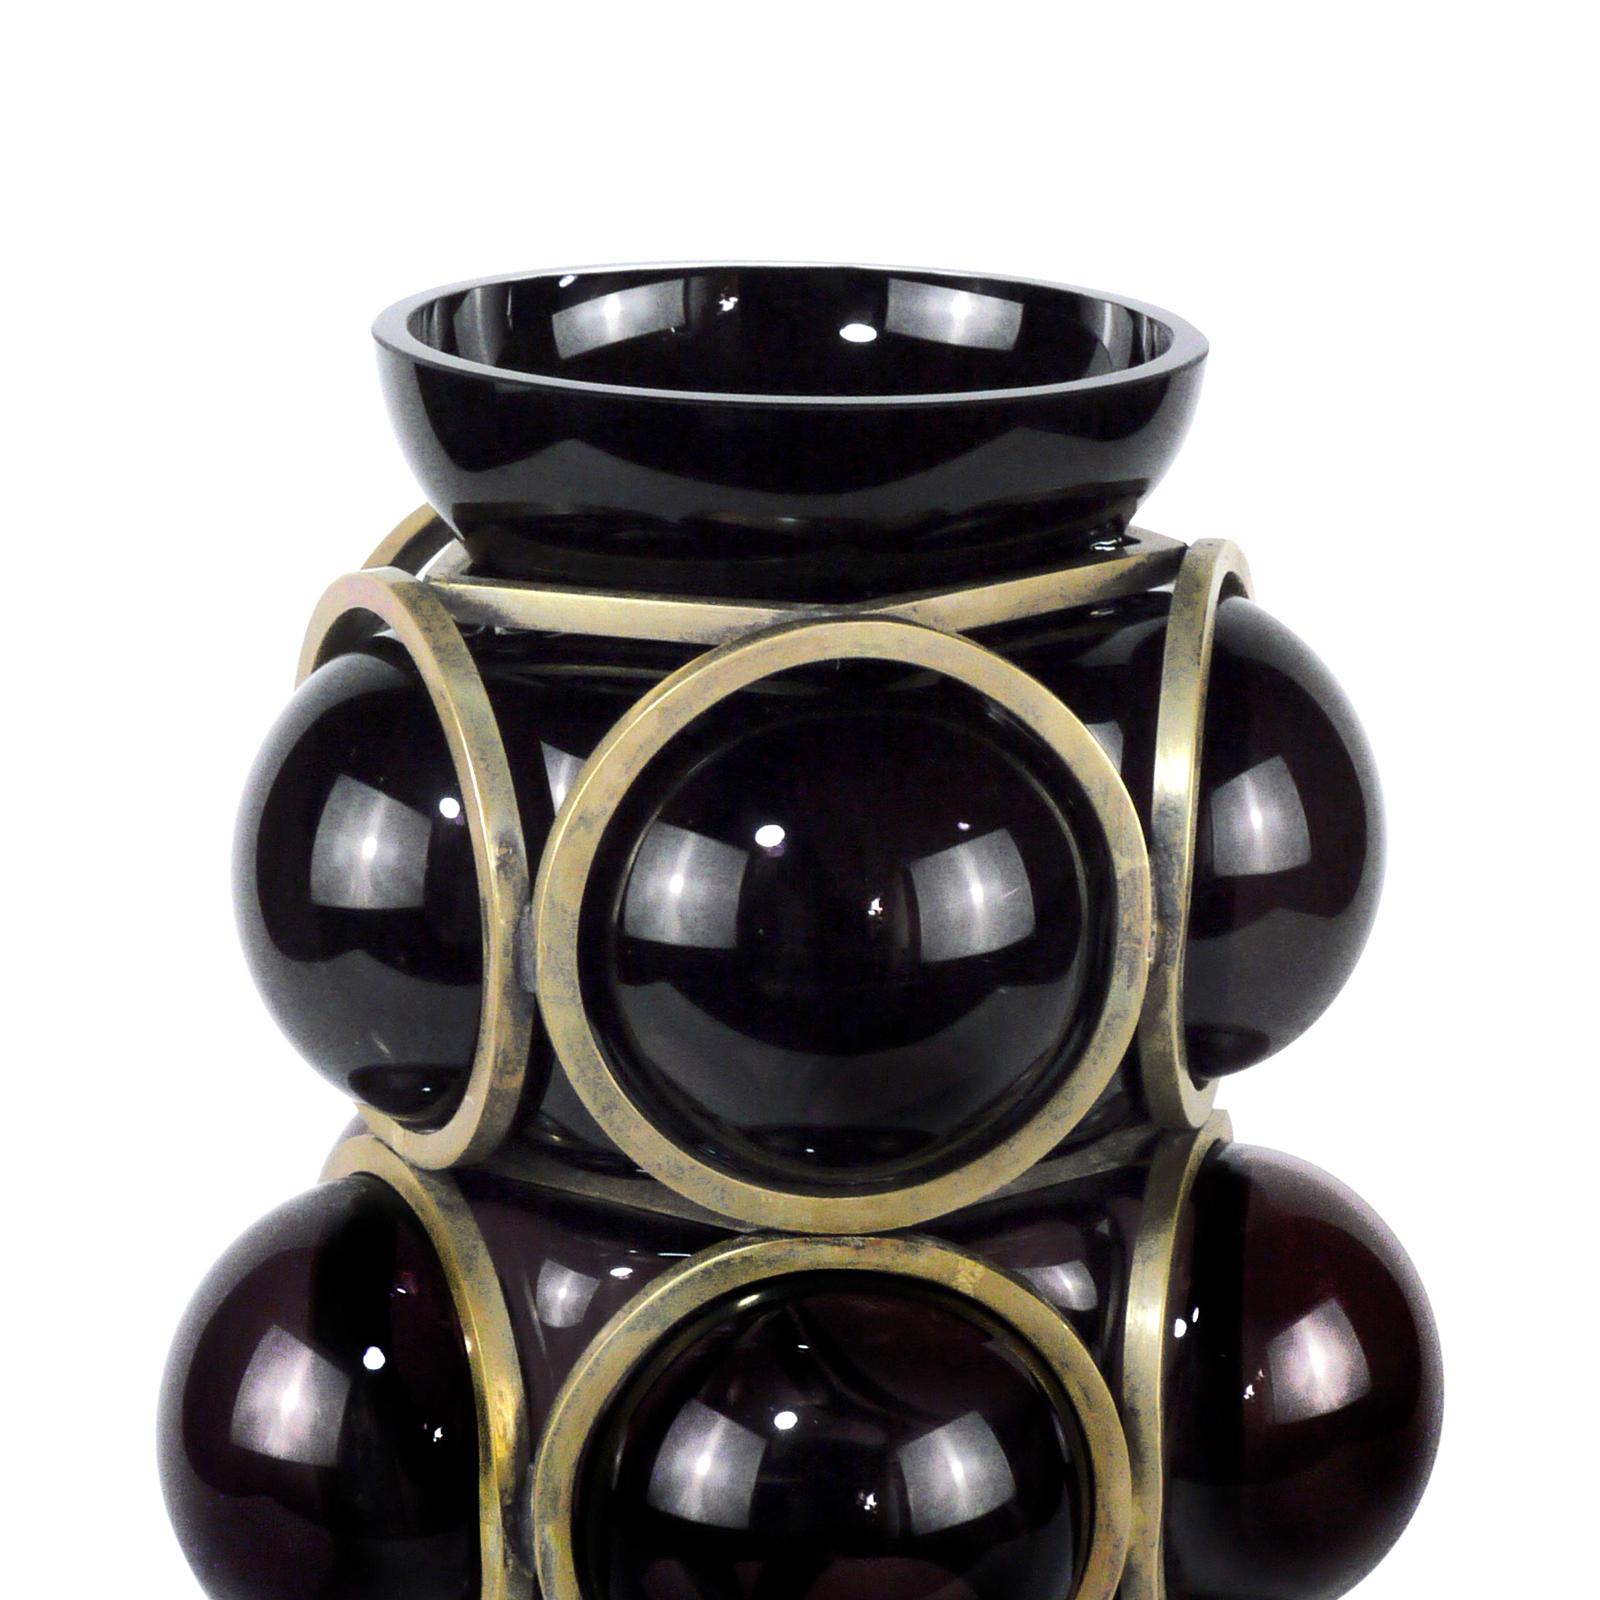 Vase Enlace black glass spheres
with handblown black glass and with 
brass structure around.